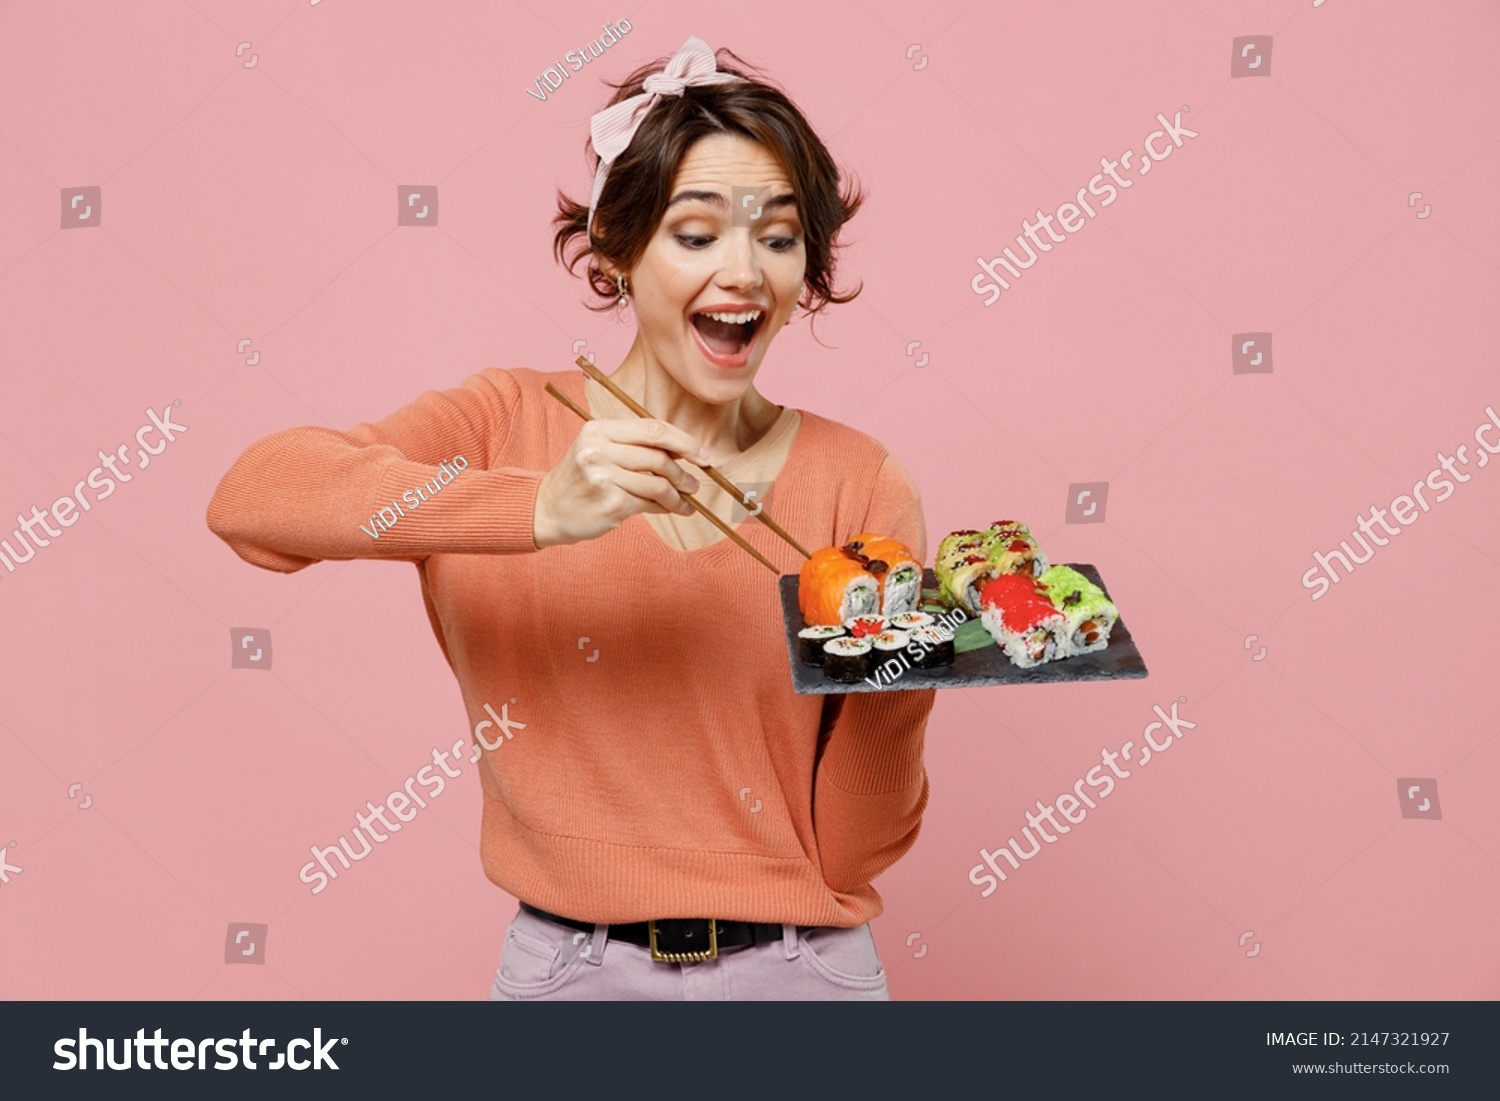 Young excited amazed cool fun woman 20s in casual clothes hold in hand eat makizushi sushi roll served on black plate traditional japanese food chopsticks isolated on plain pastel pink background. #2147321927